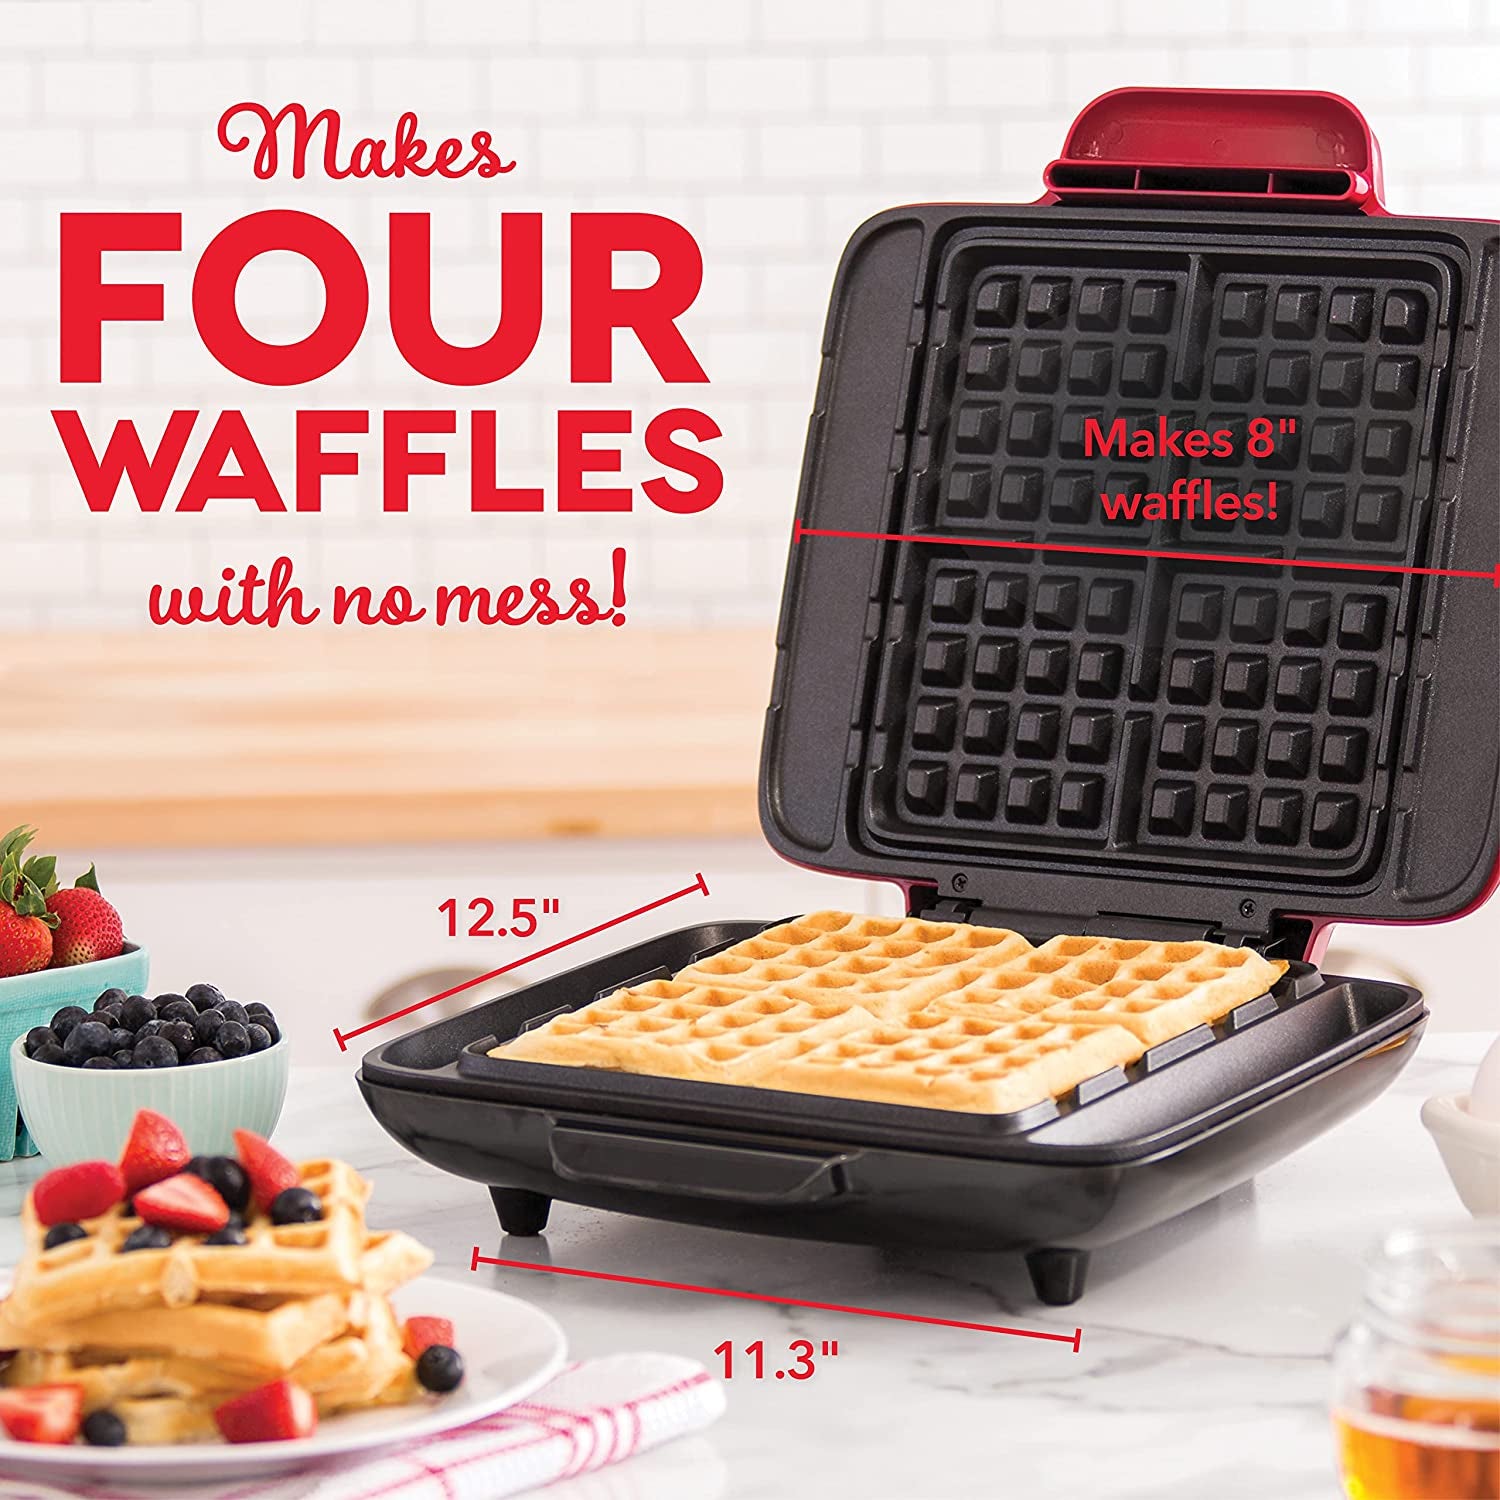 Deluxe No-Drip Belgian Waffle Iron Maker Machine 1200W + Hash Browns, or Any Breakfast, Lunch, & Snacks with Easy Clean, Non-Stick + Mess Free Sides, Red - Design By Technique